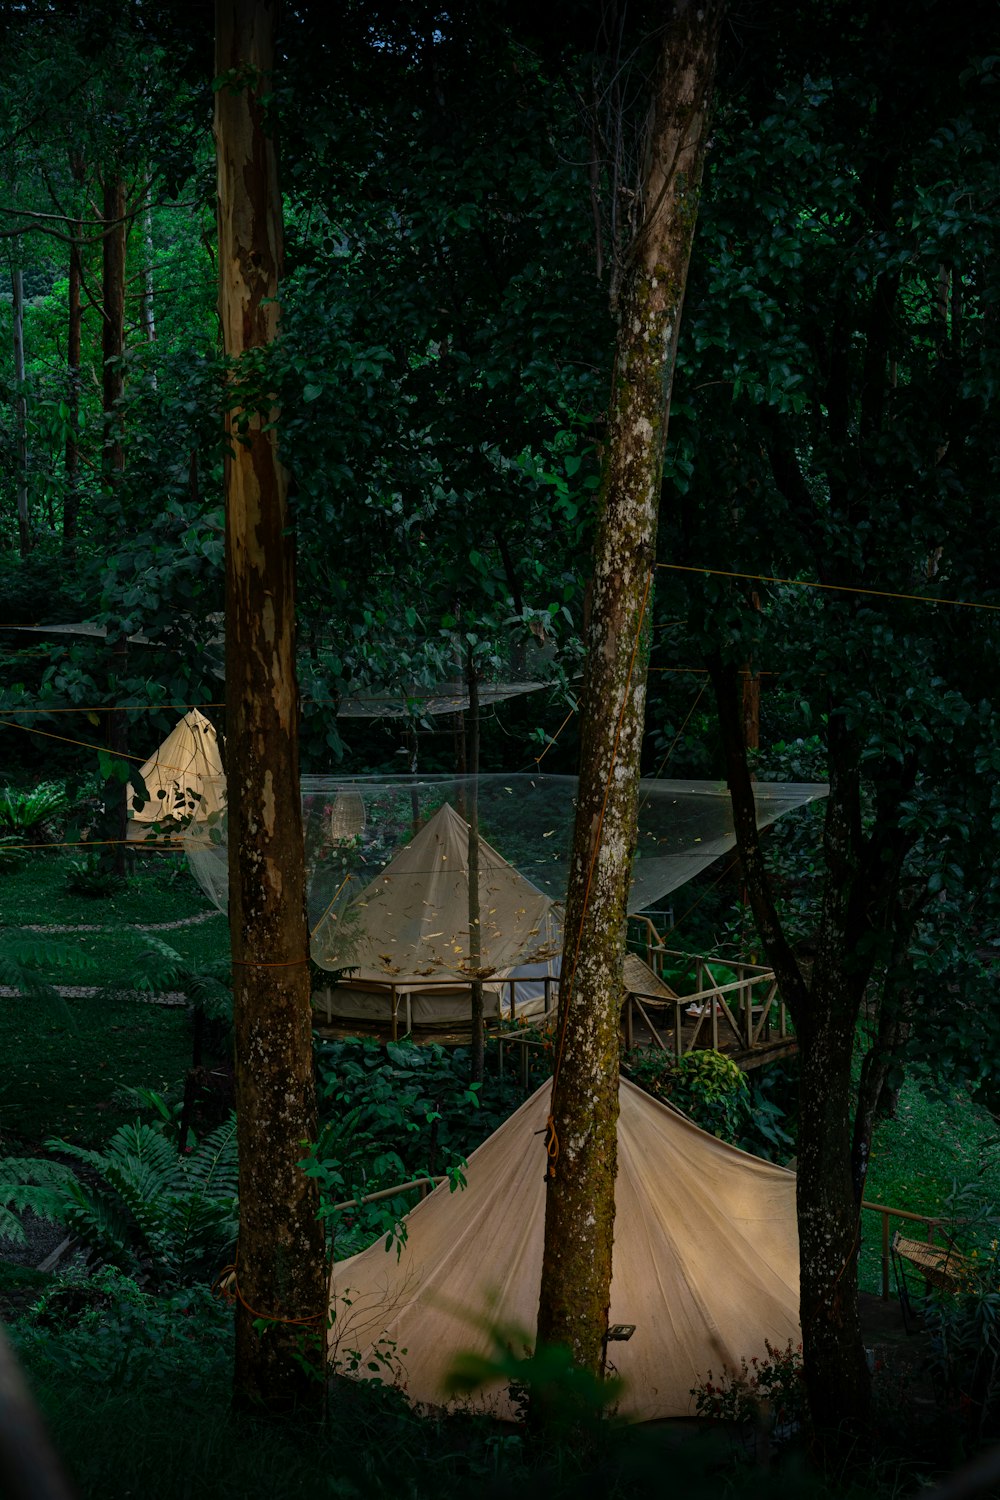 a group of tents in a forest